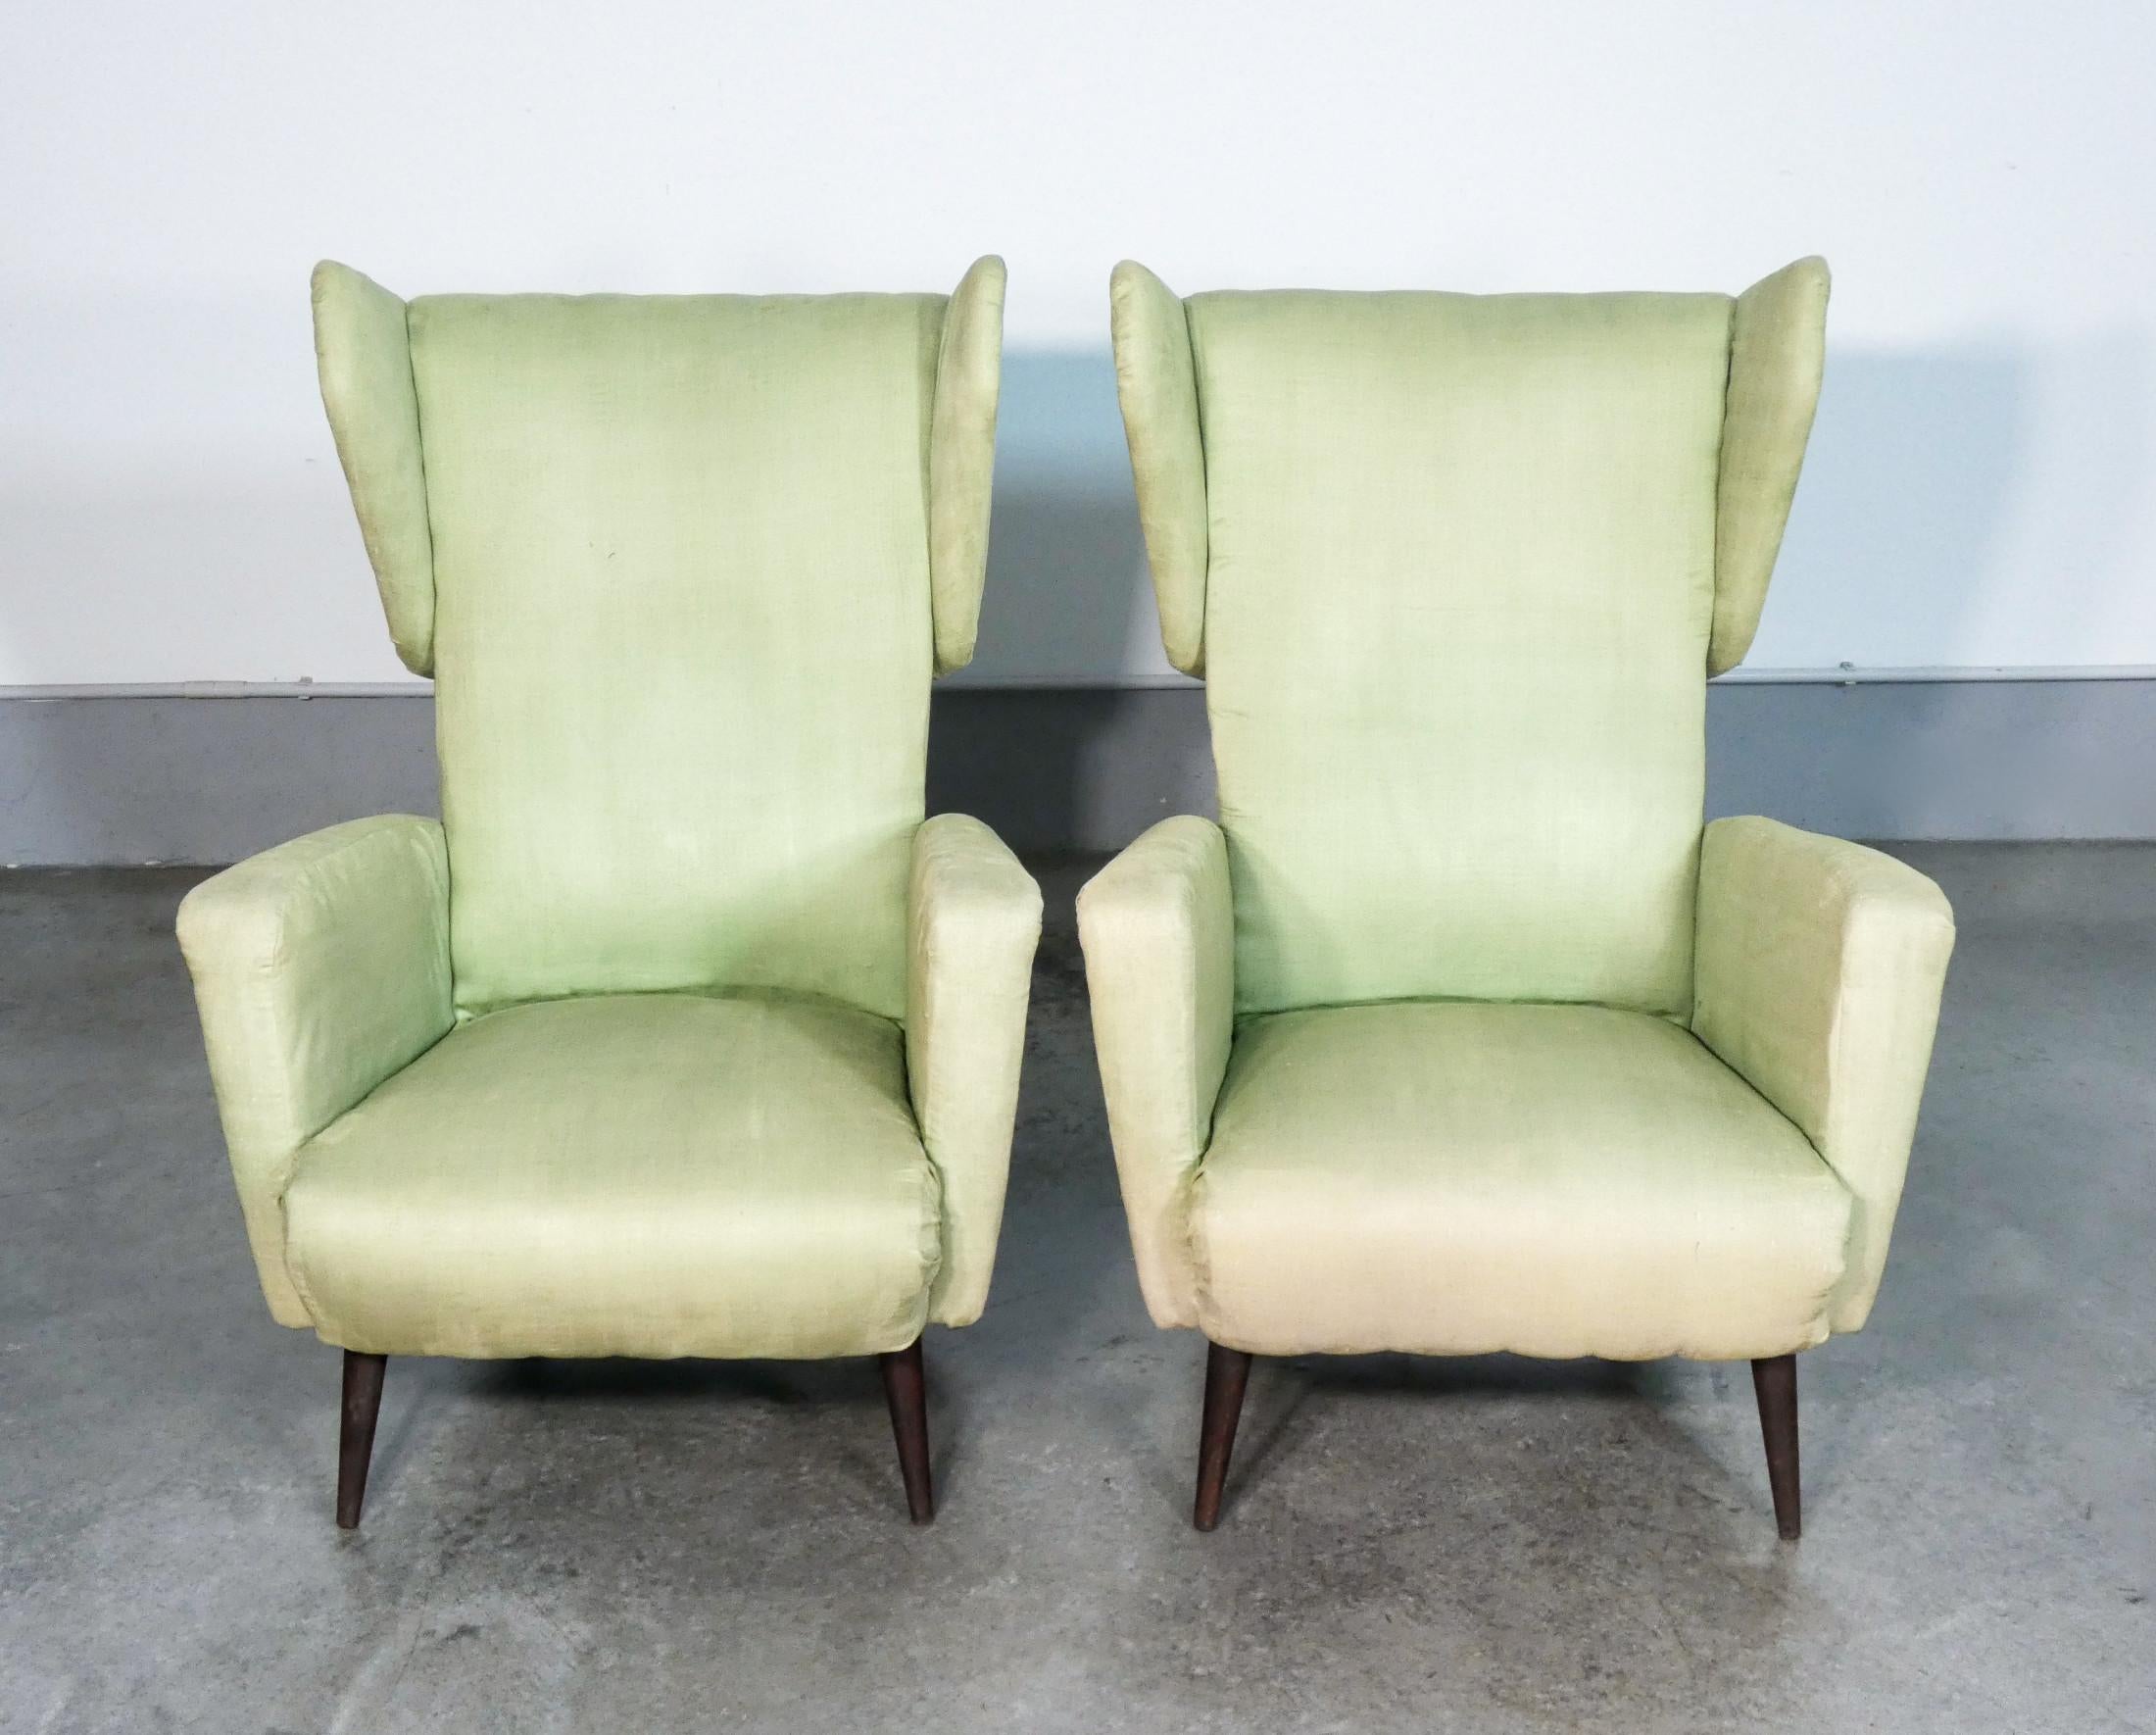 Italian Pair of Armchairs, Design Giò Ponti for Cassina, 1950s, for Hotel Royal, Naples